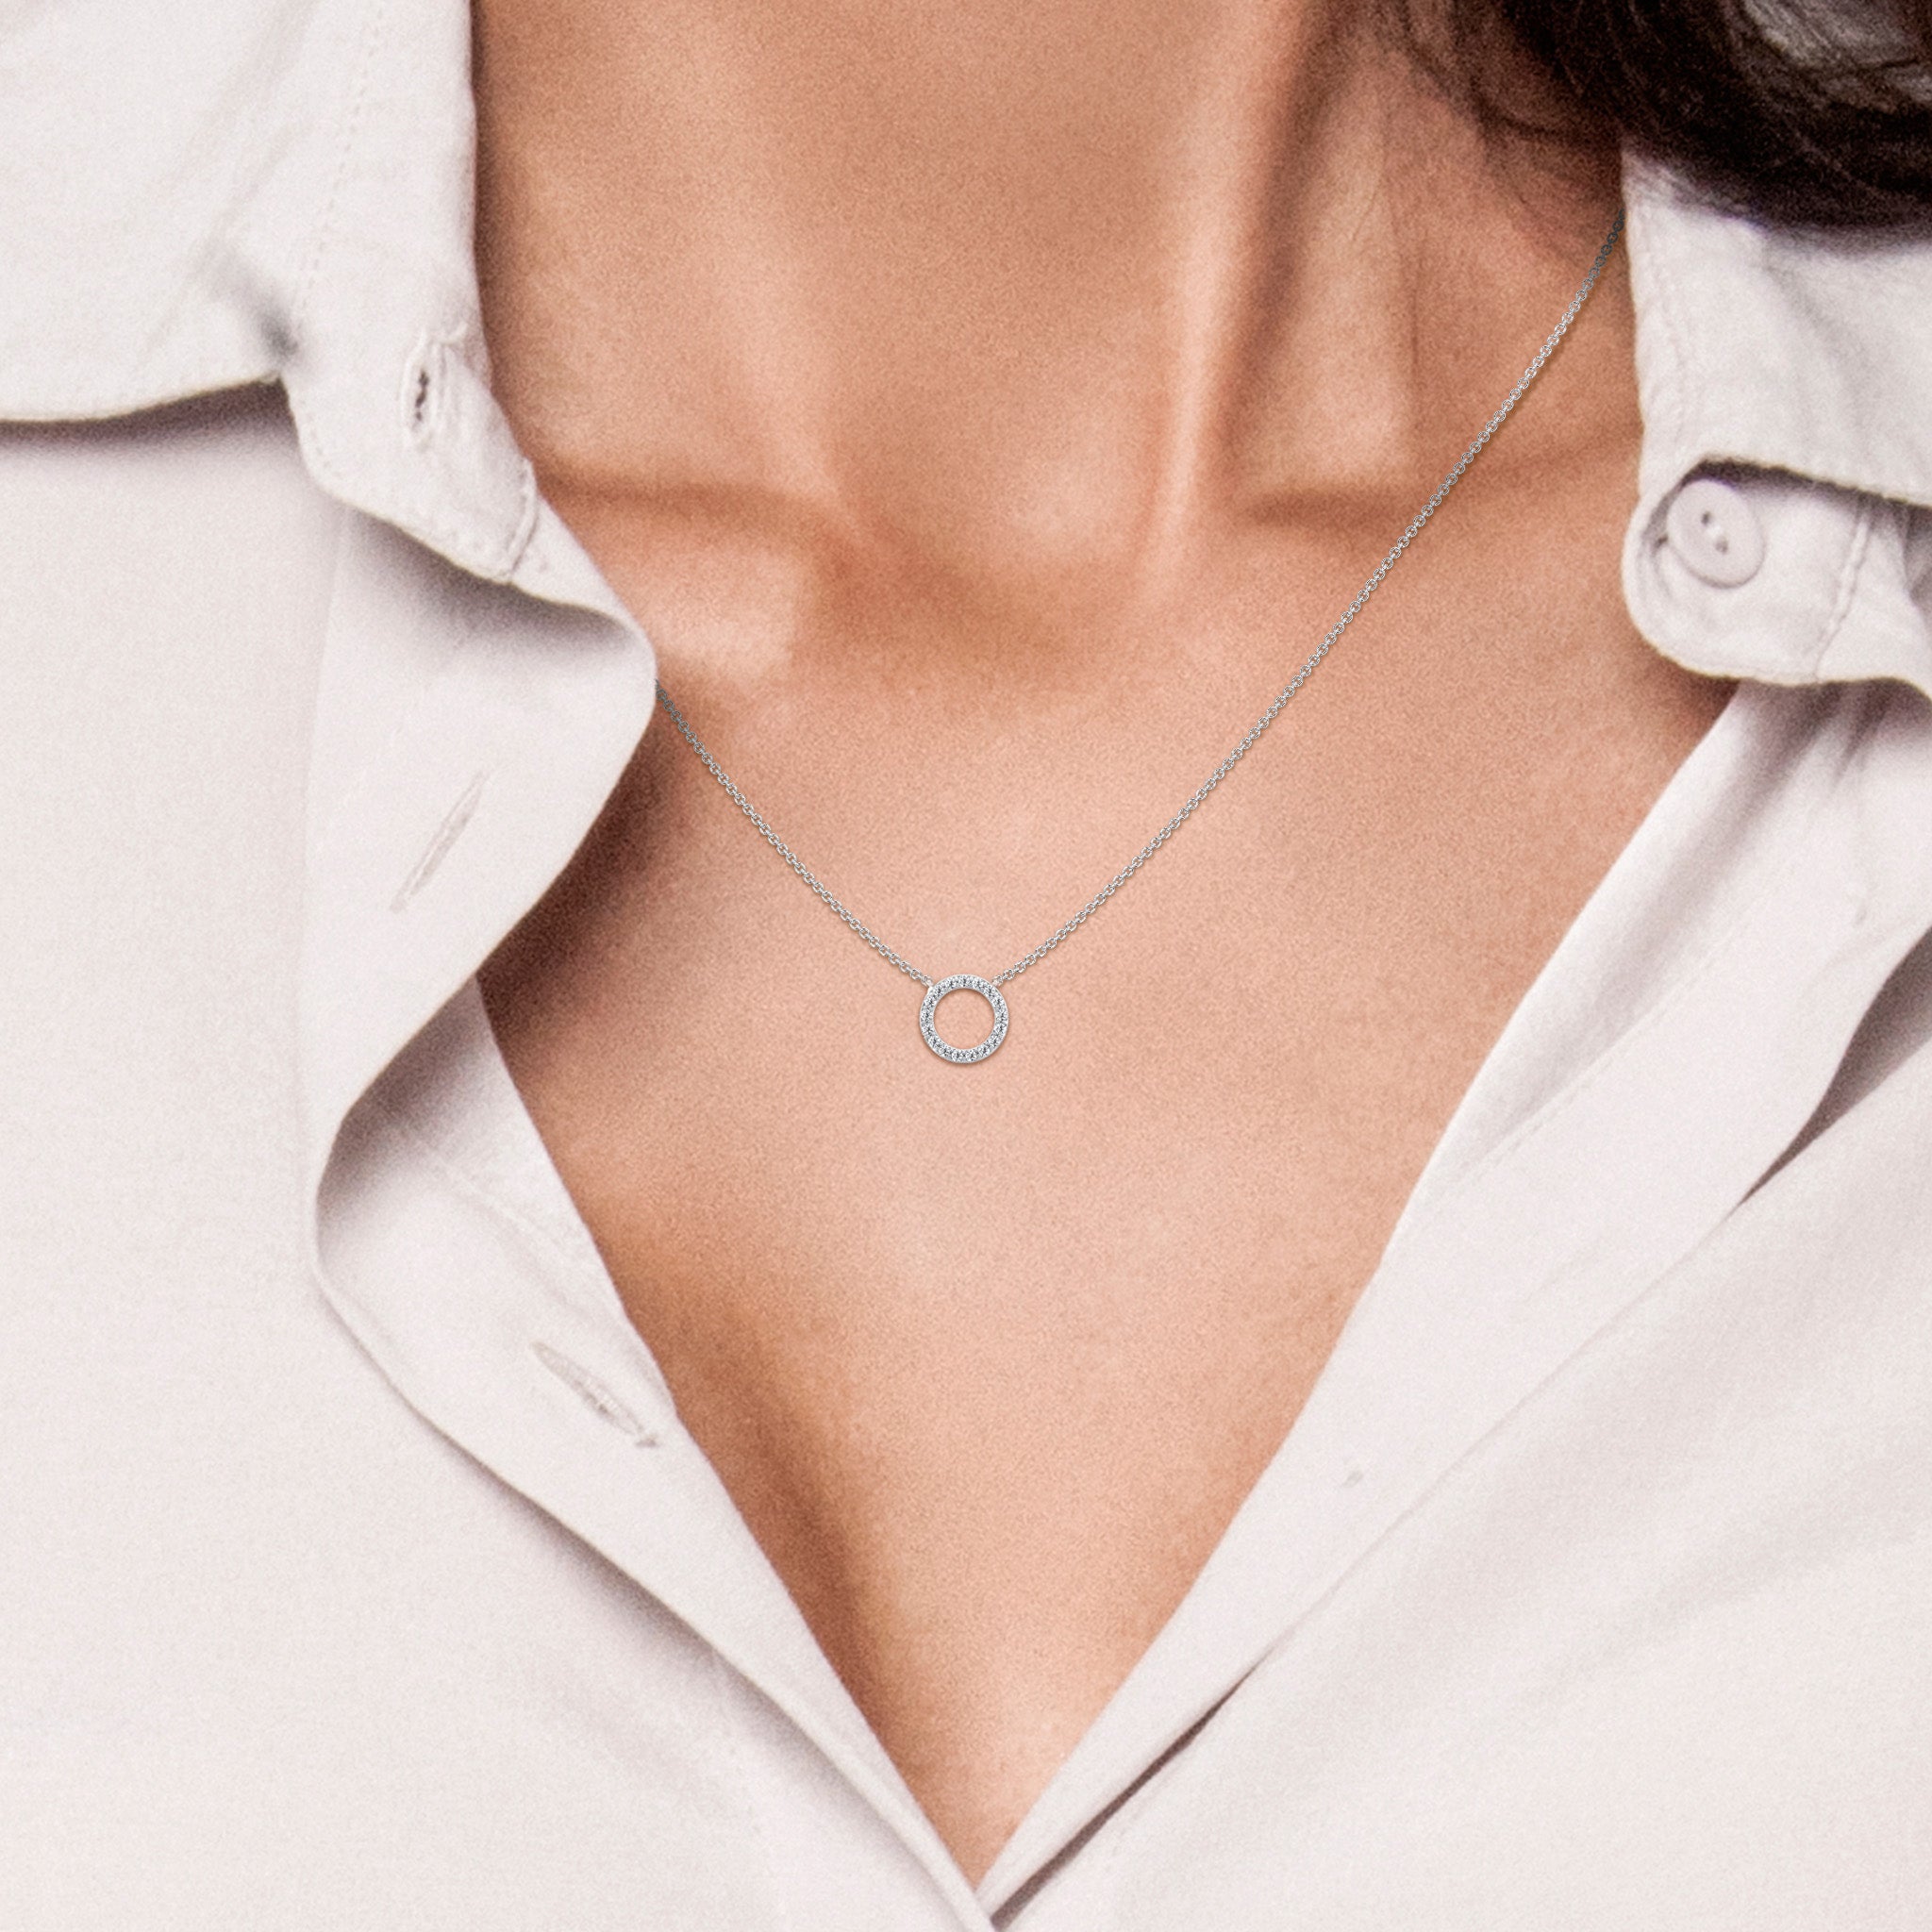 Shimansky - Women Wearing the Circle of Life Microset Diamond Necklace crafted in 14K White Gold